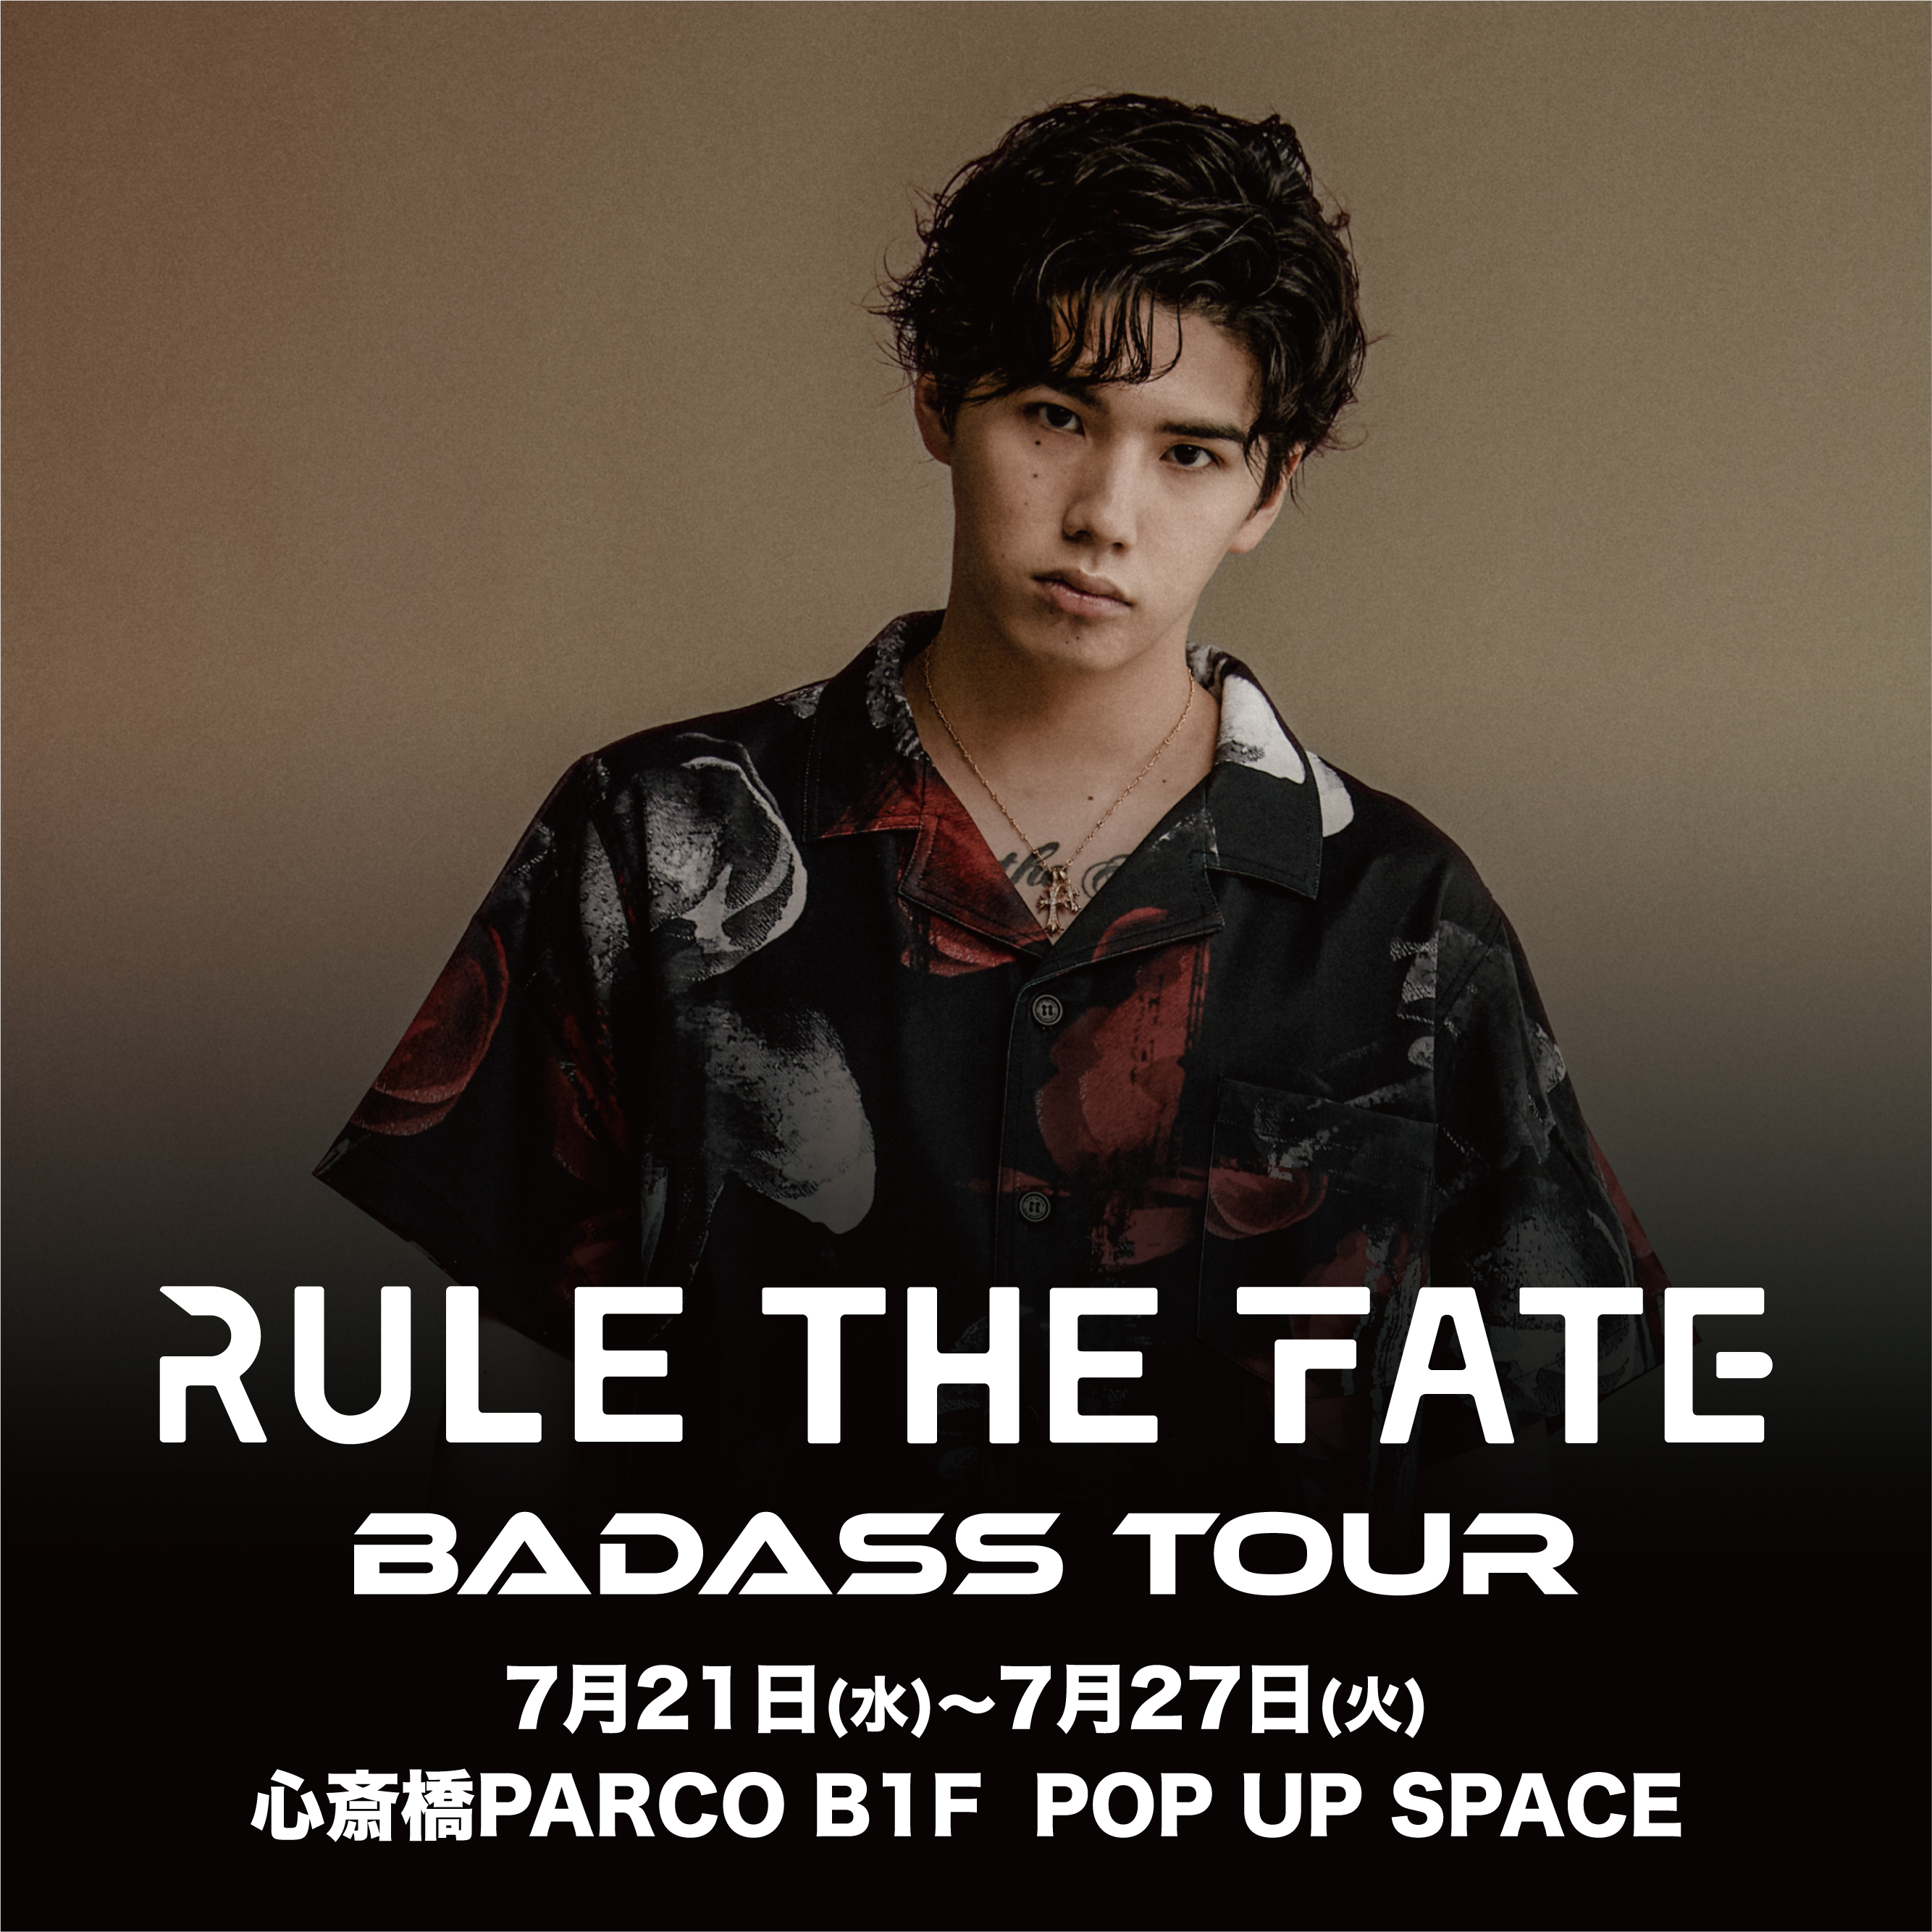 RULE THE FATE マイファス Hiro - Tシャツ